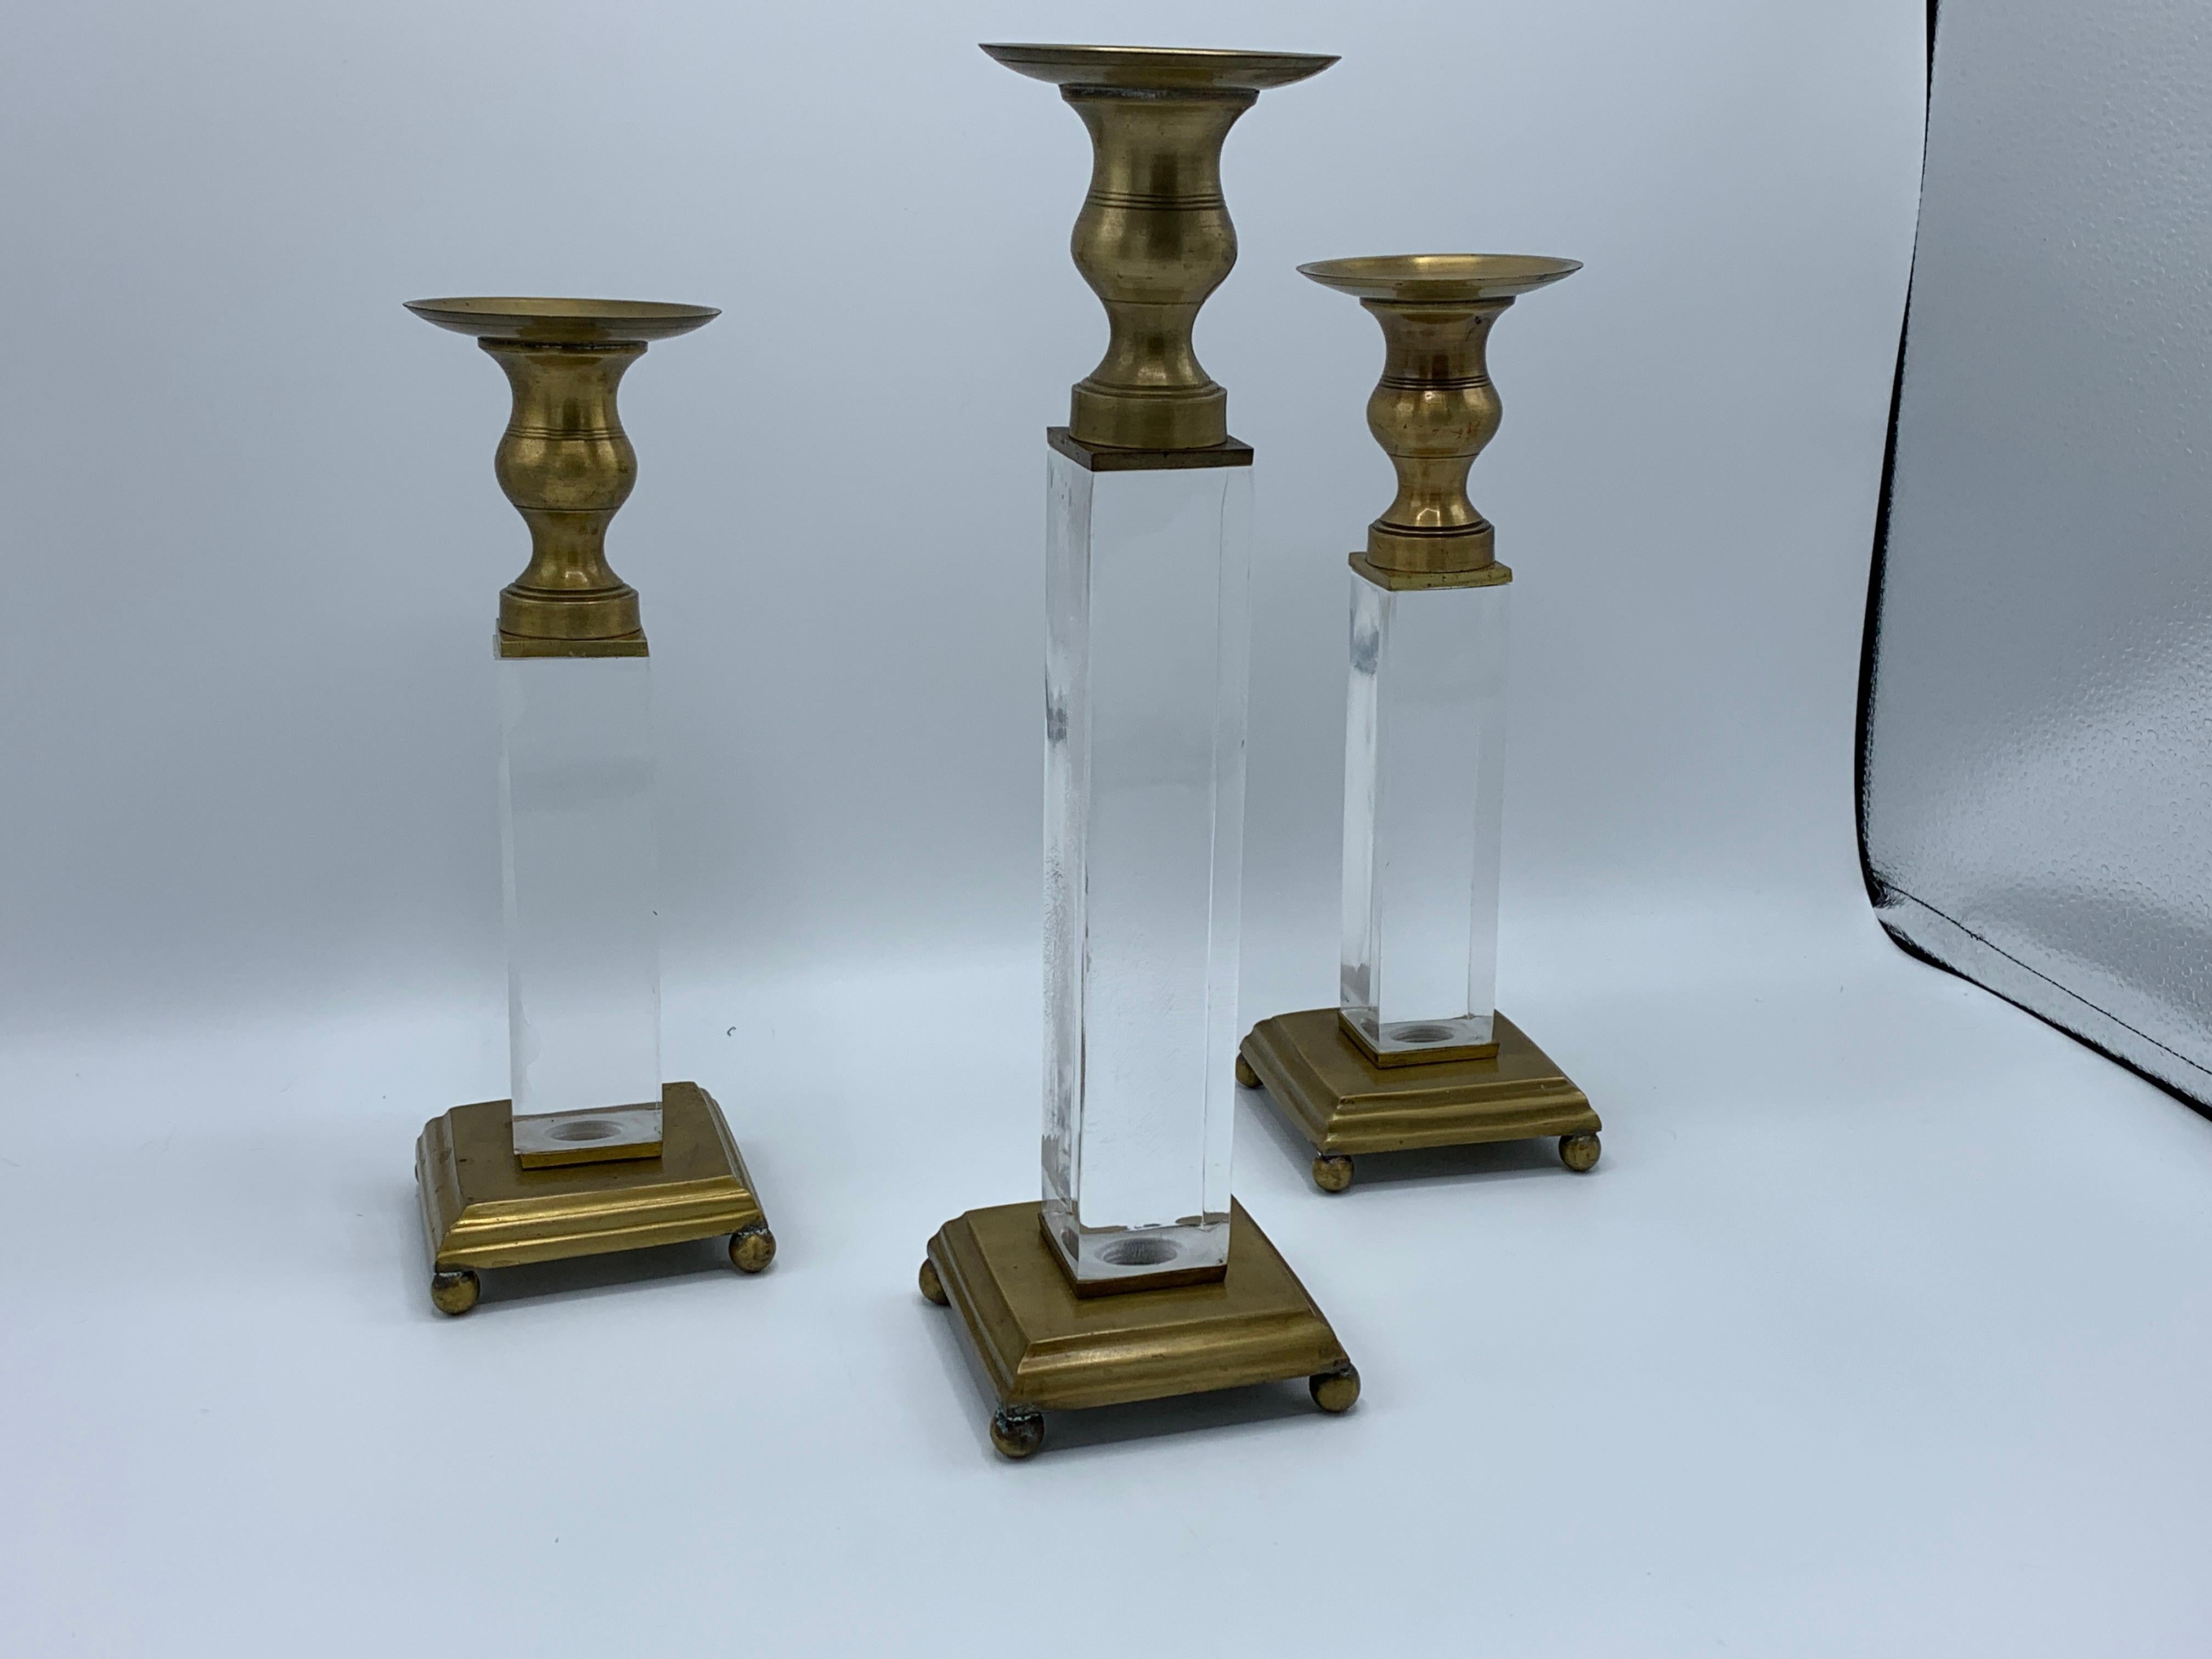 Listed is a gorgeous, set of three, 1970s Charles Hollis Jones style Lucite and brass candlesticks. Large(x1); 3.5in D x 3.5in W x 12.5in H. Small(x2); 3.5in D x 3.5in W x 10.25in H. Each Lucite block is 1.5in thick. Heavy, 5.5lbs for the entire set.